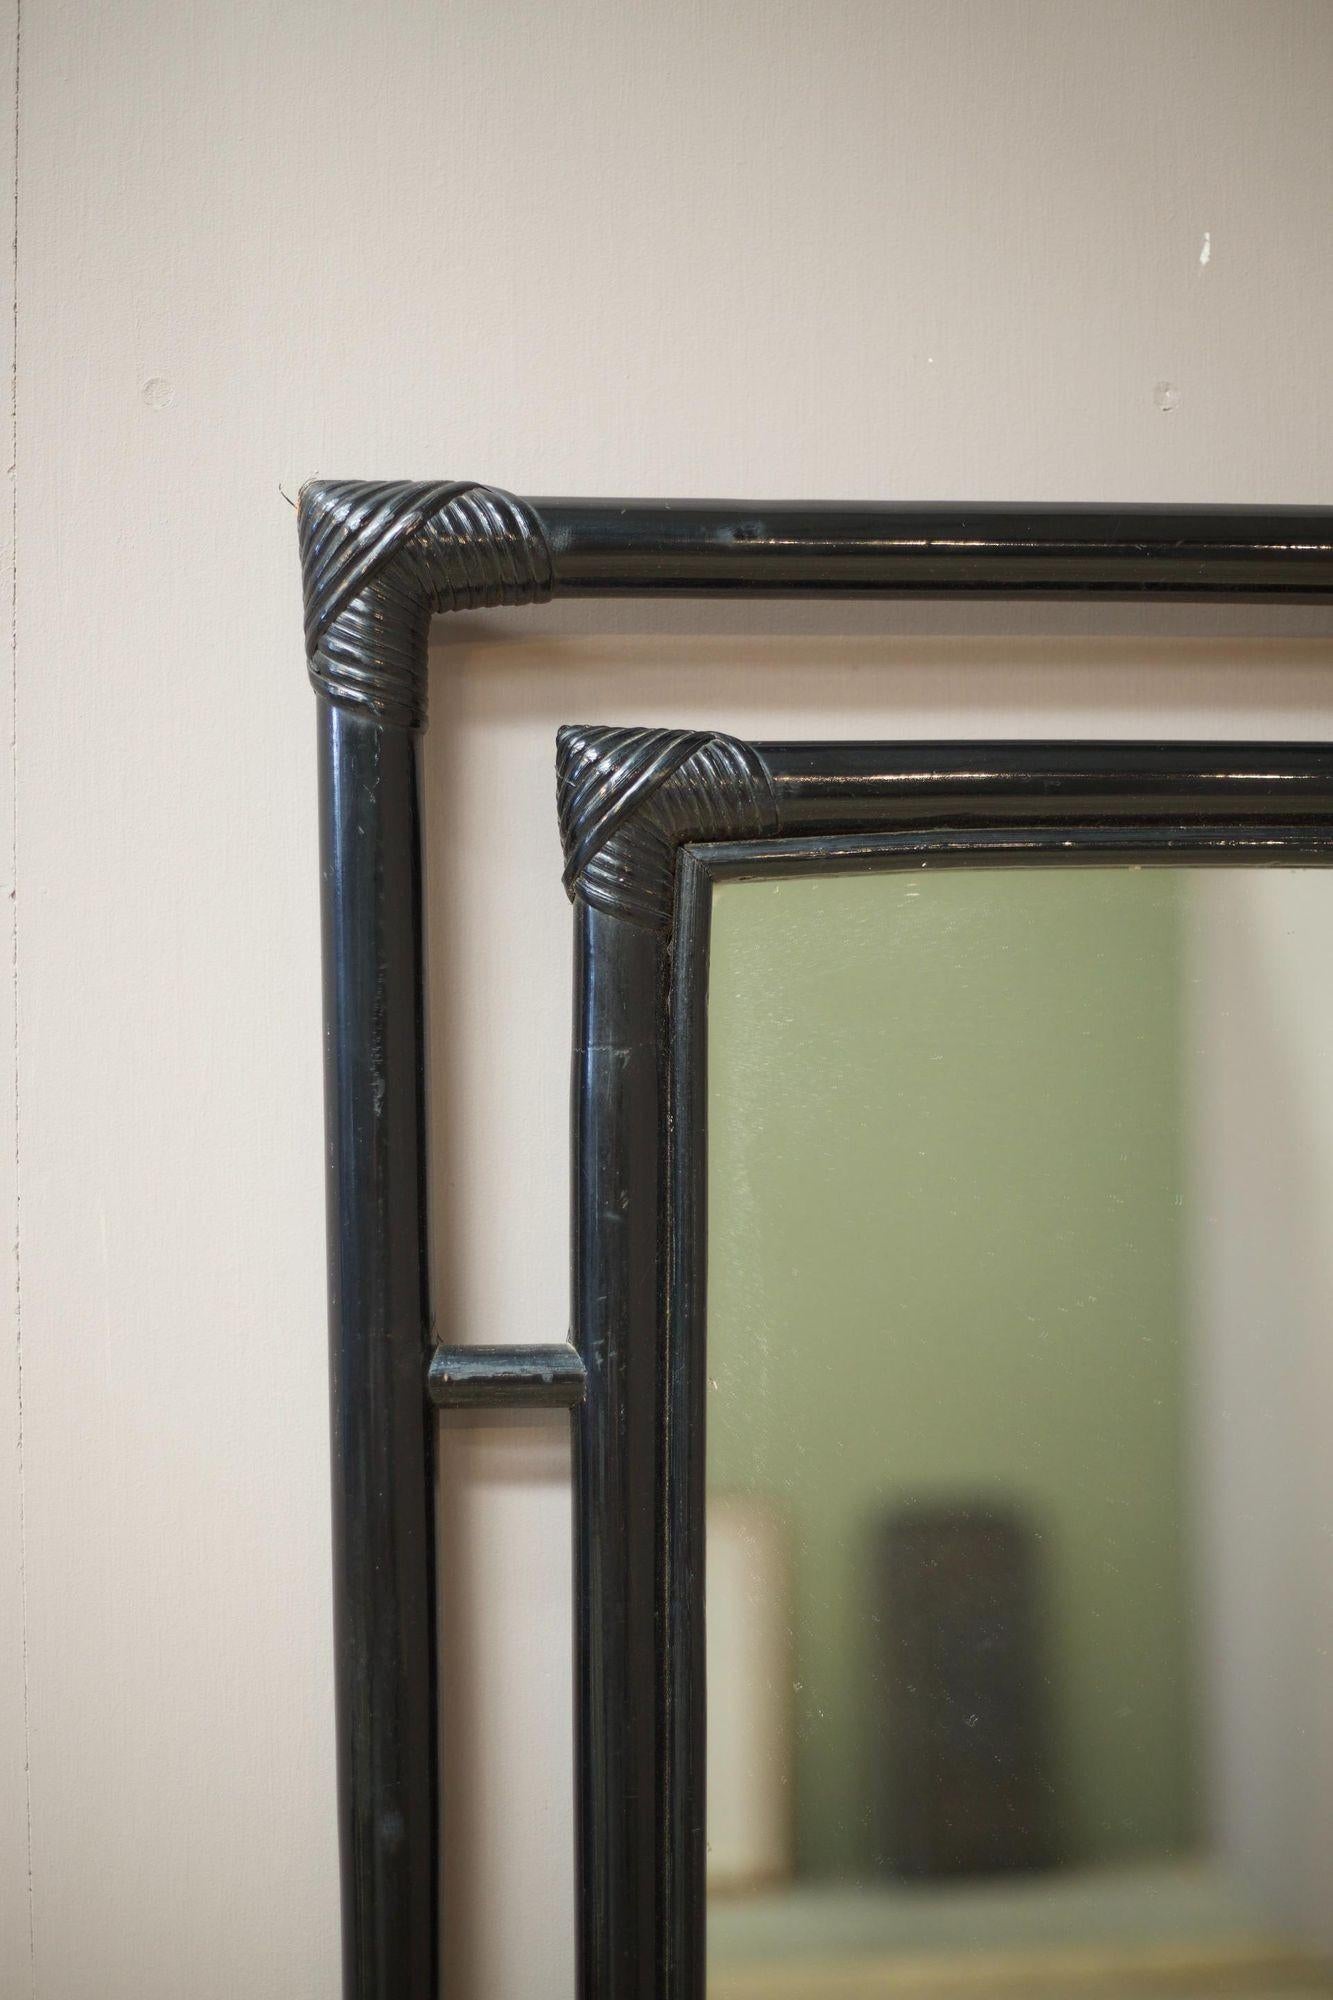 This is a nice quality midcentury Black lacquer bamboo mirror. In clean original condition with a large mirror plate. Making this a hugely decorative addition to a room. The frame is all bamboo which has been lacquered in black giving it a Classic